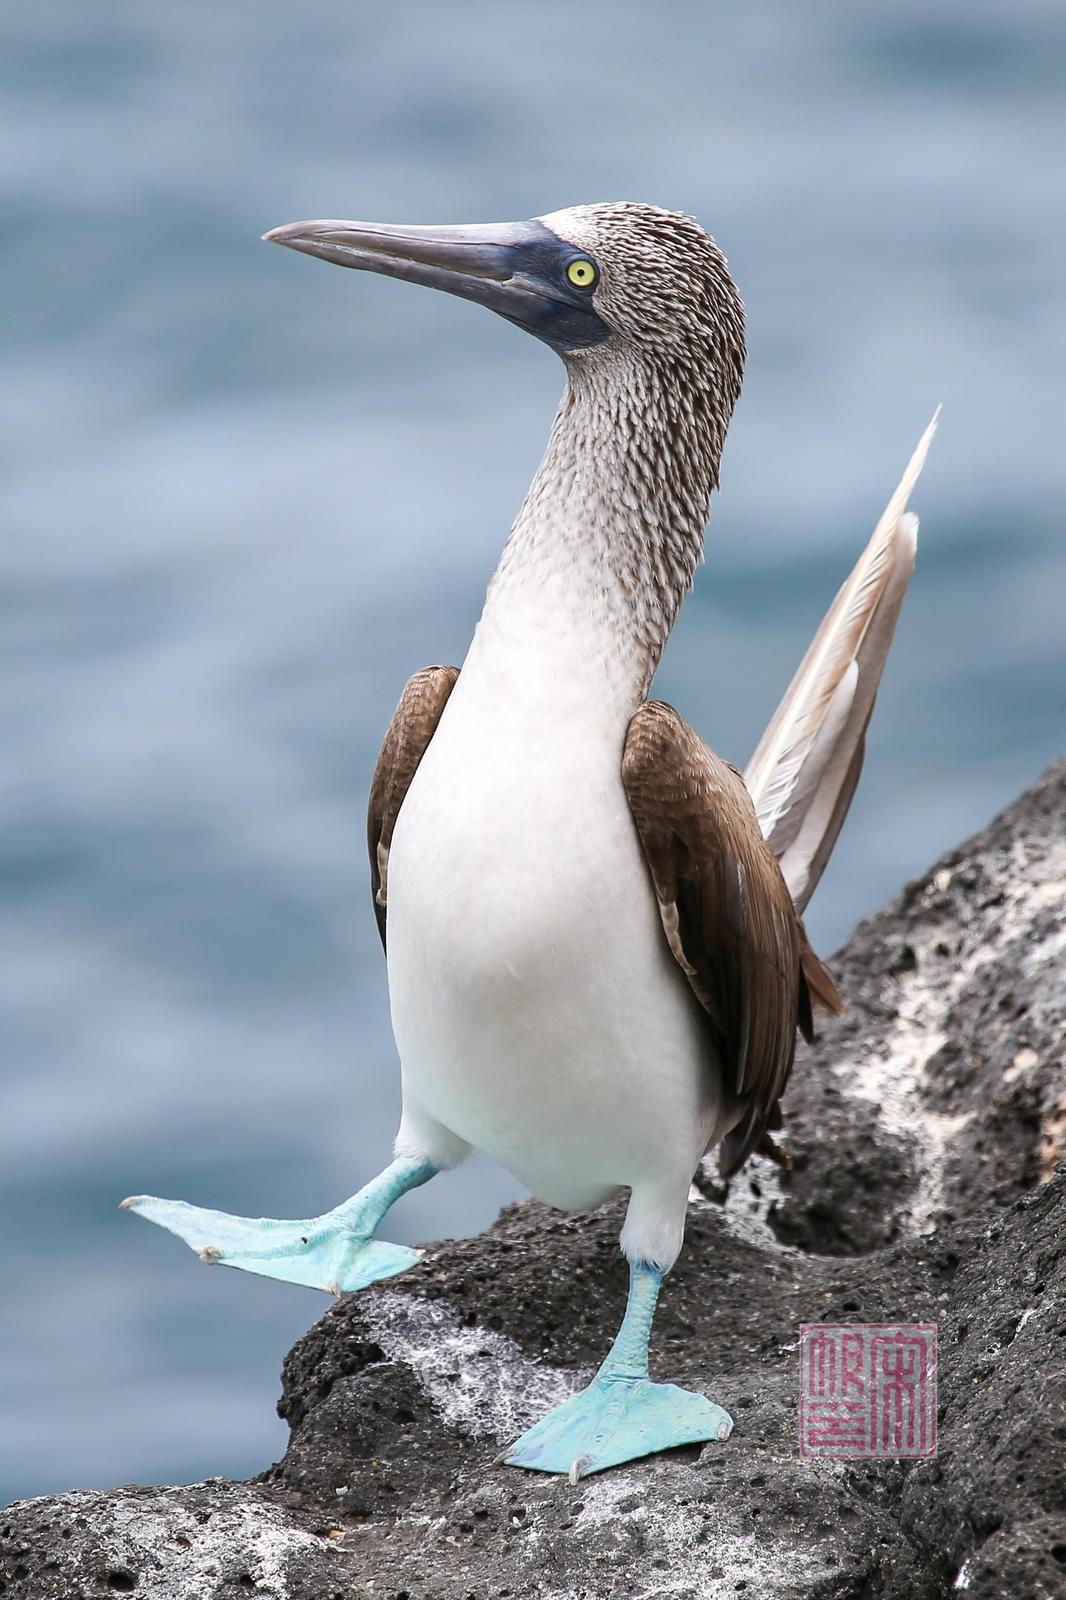 Blue-footed Booby Photo by Fan Song